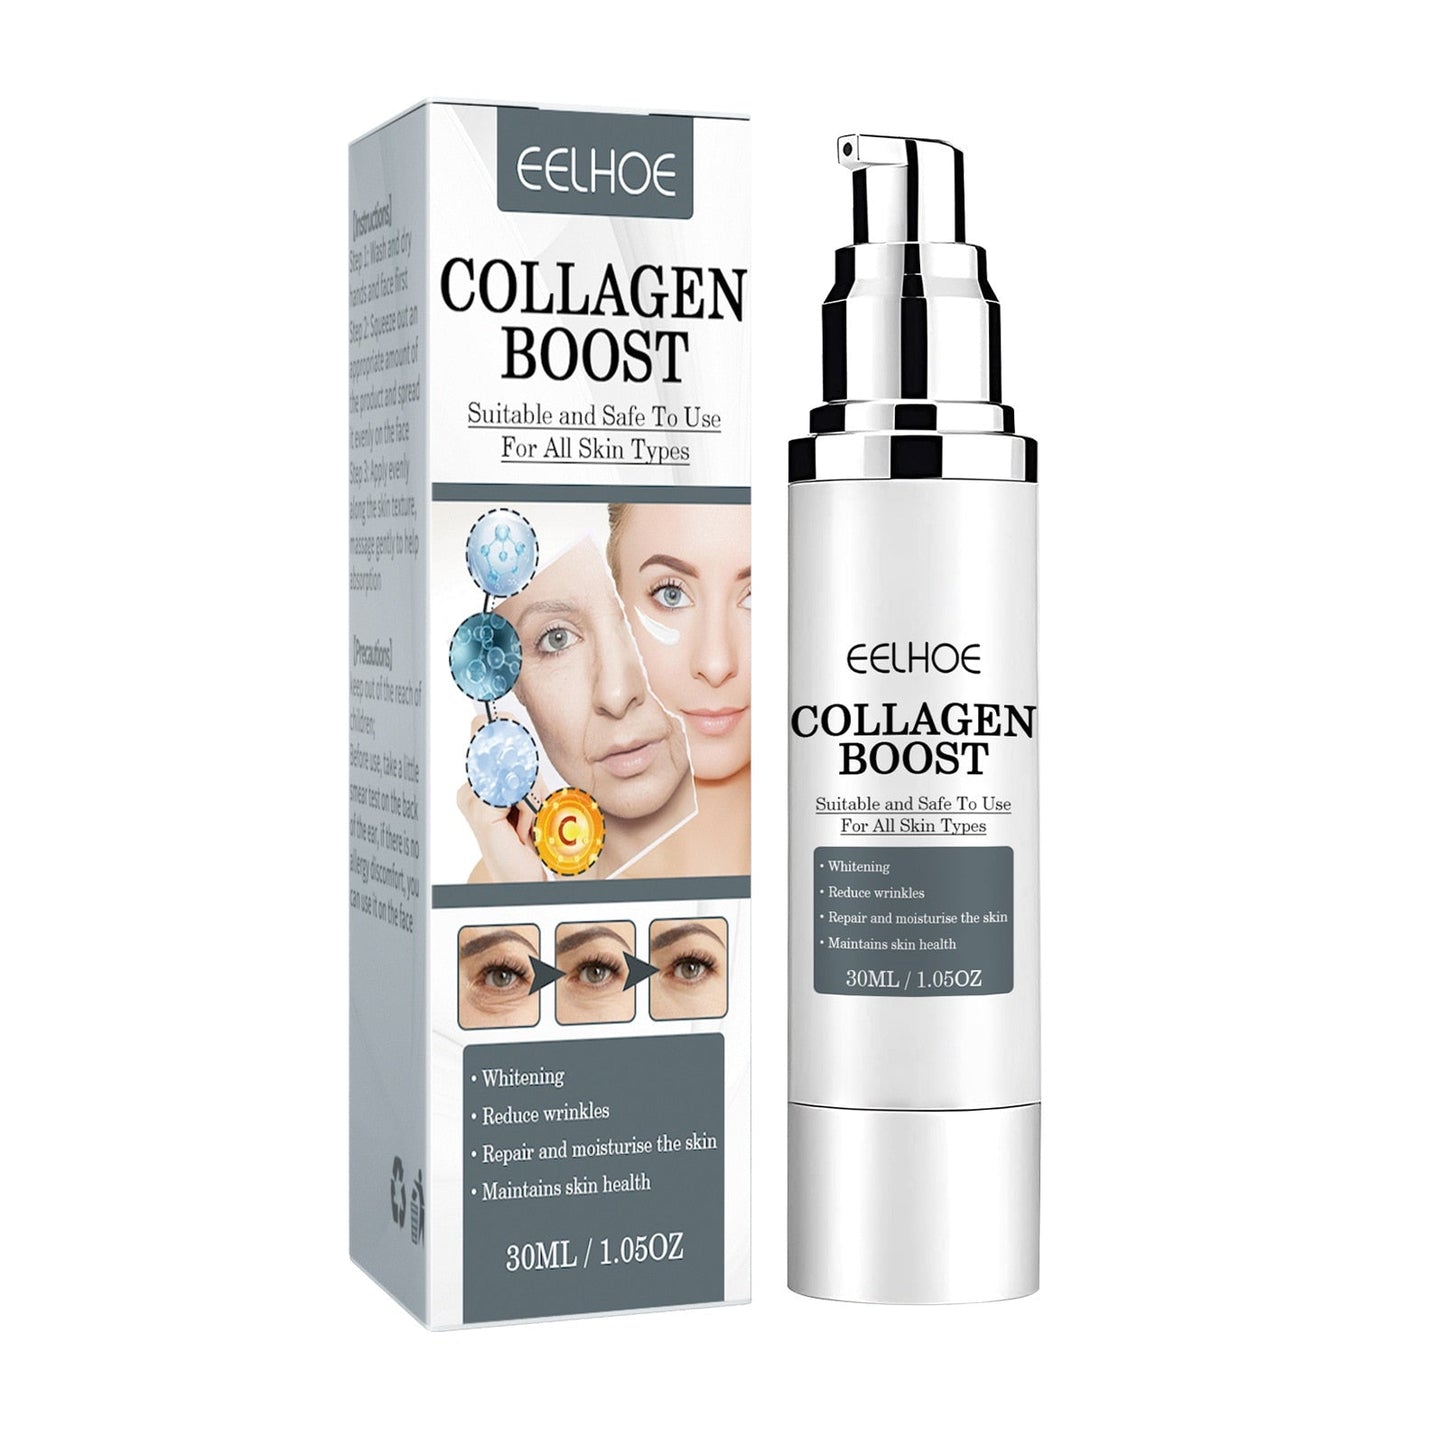 CollagenBoost™ | The Collagen boost your skin craves!